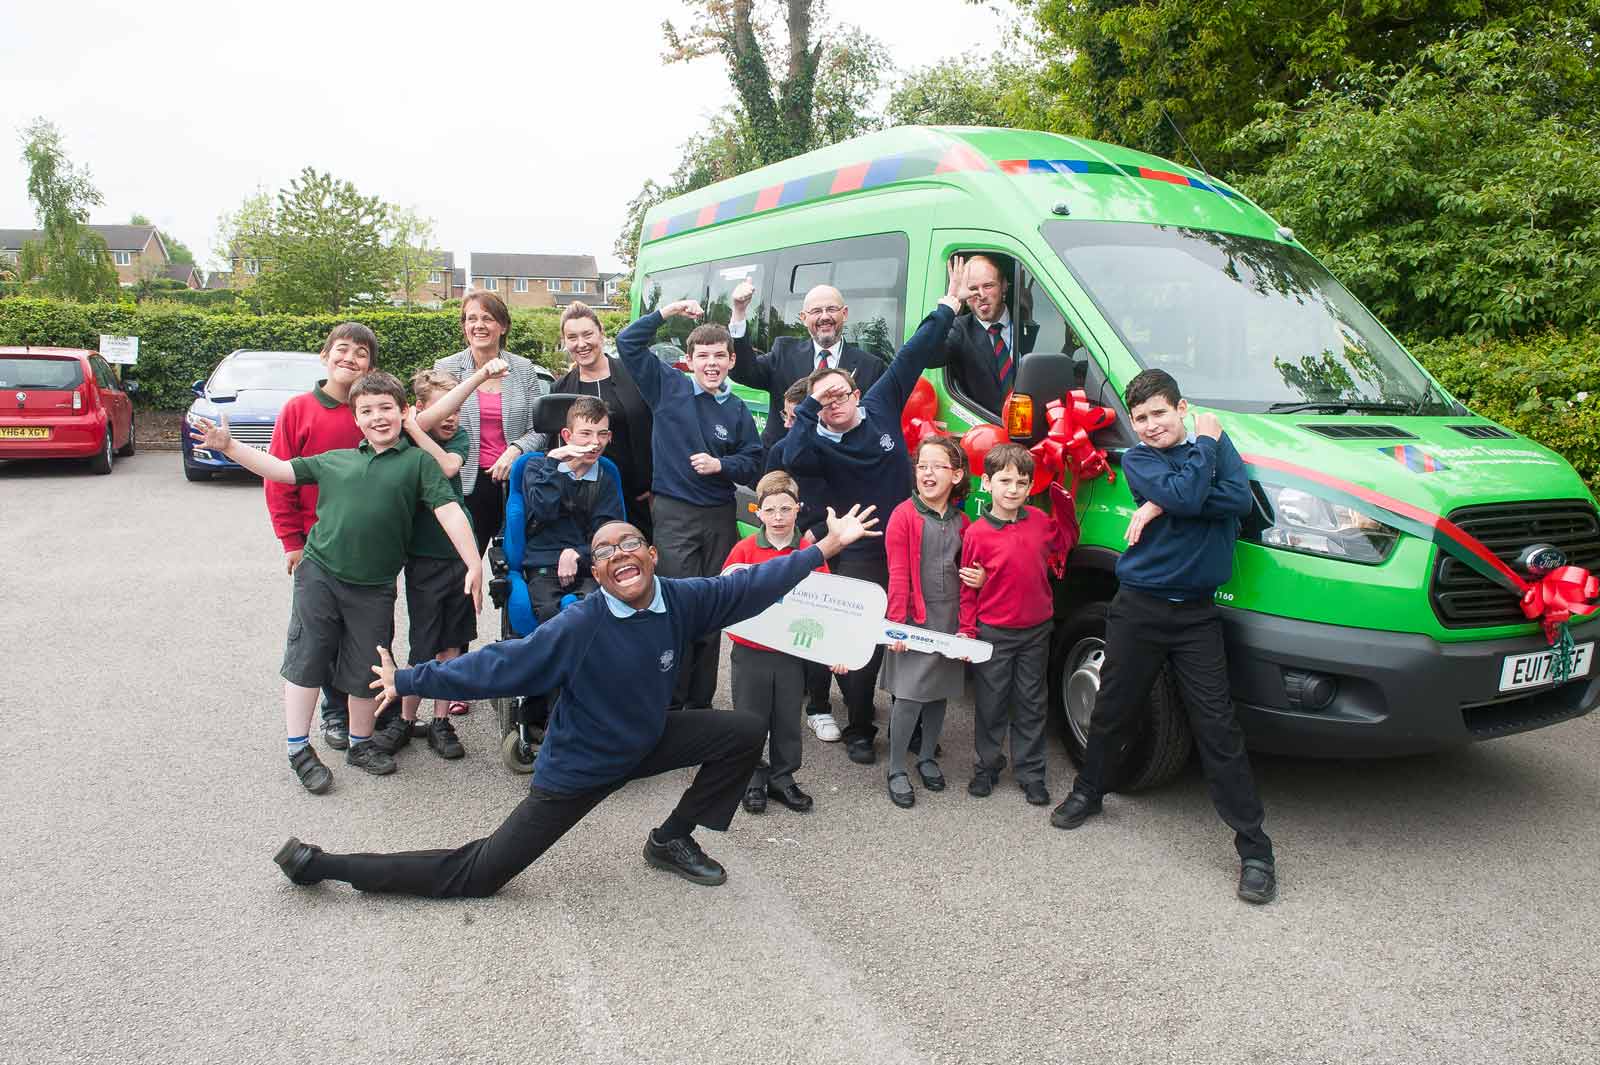 Funding from People's Postcode lottery helps provide Forest School with Lord's Taverners minibus